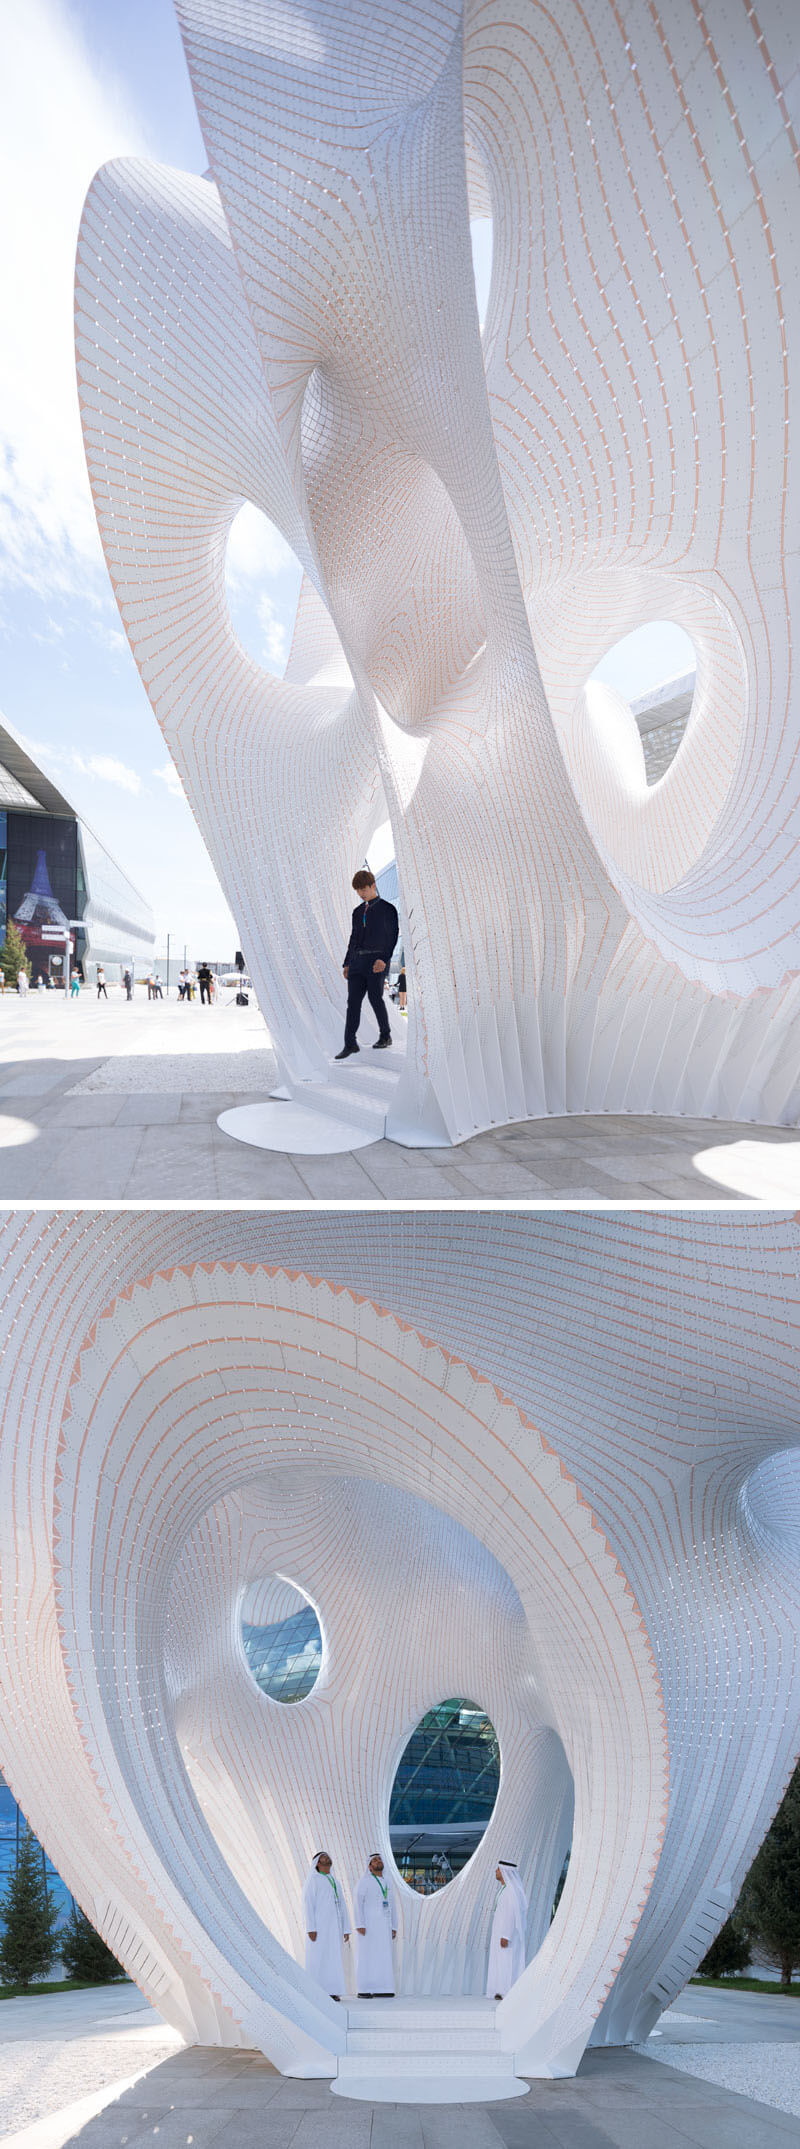 Curvaceous Public Art Sculpture Made From 5,312 Stripes Of Thin Aluminum 5 (1)